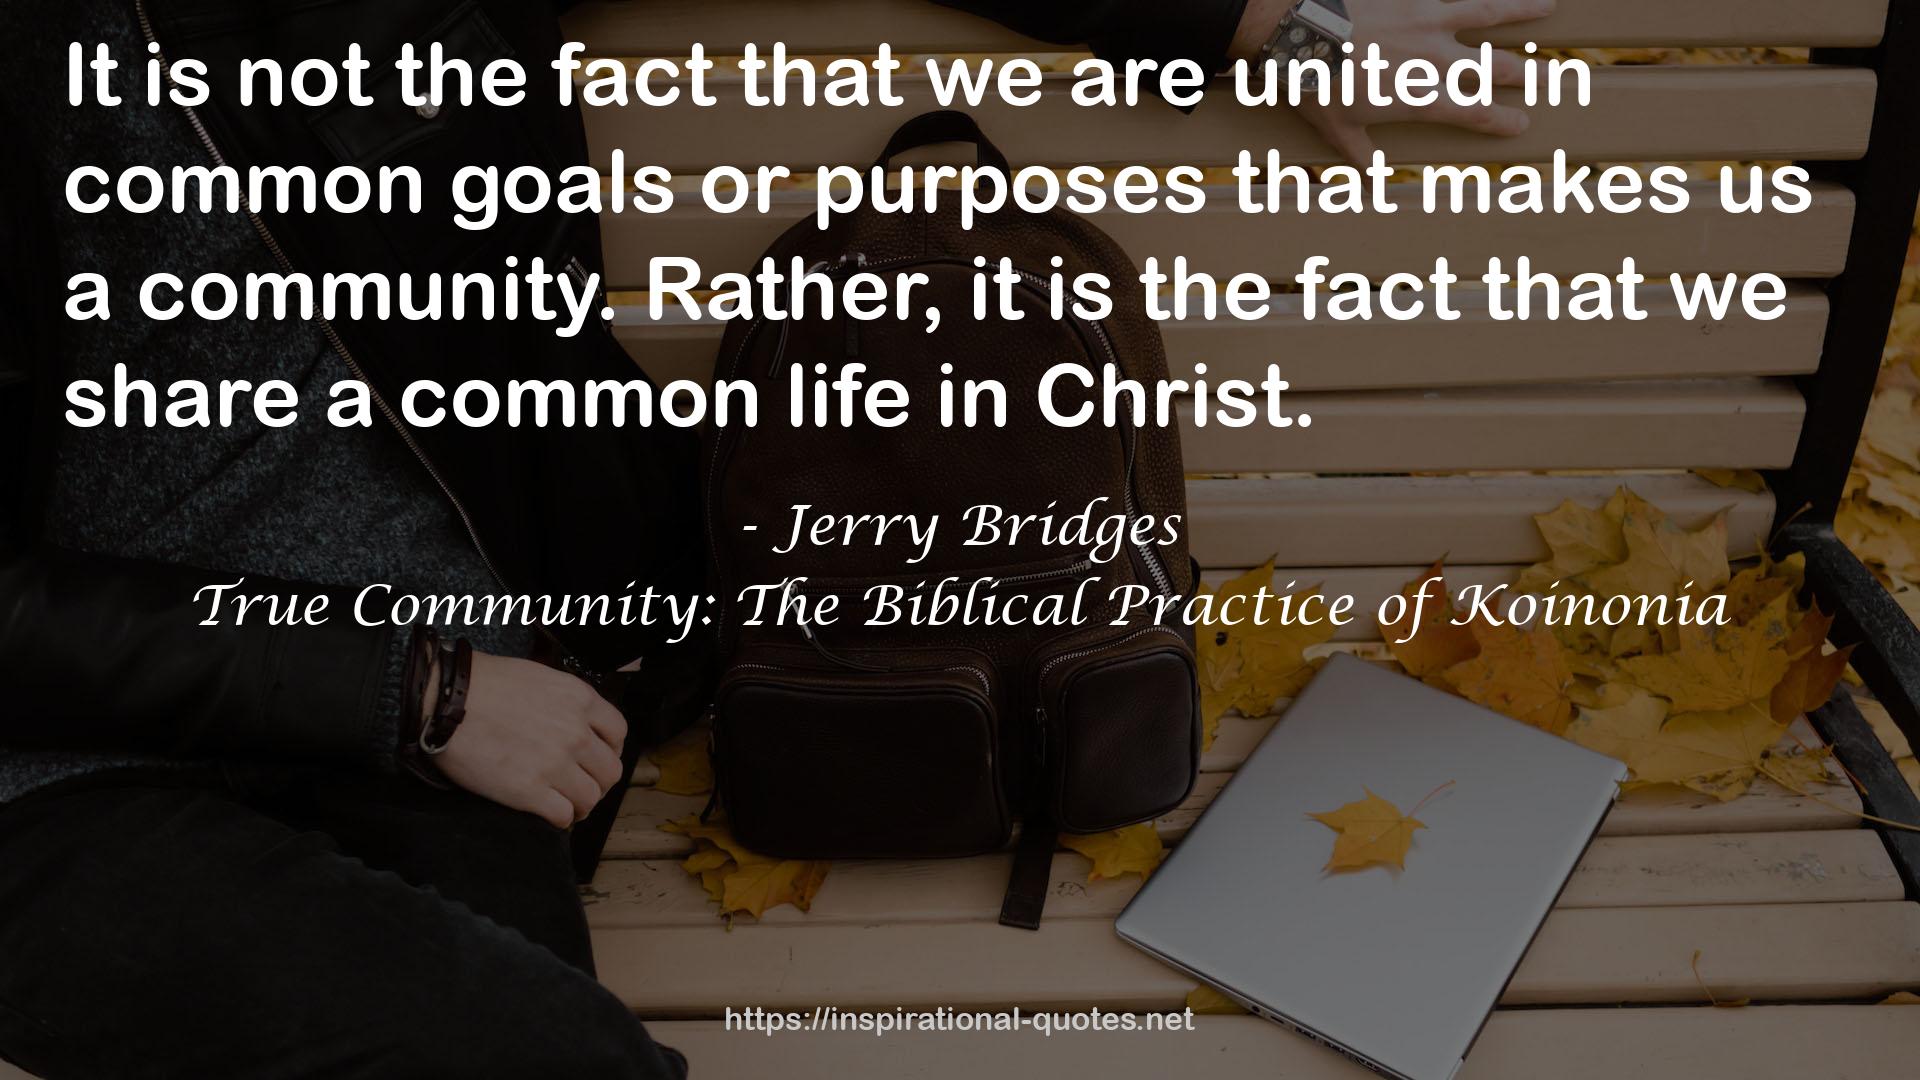 True Community: The Biblical Practice of Koinonia QUOTES